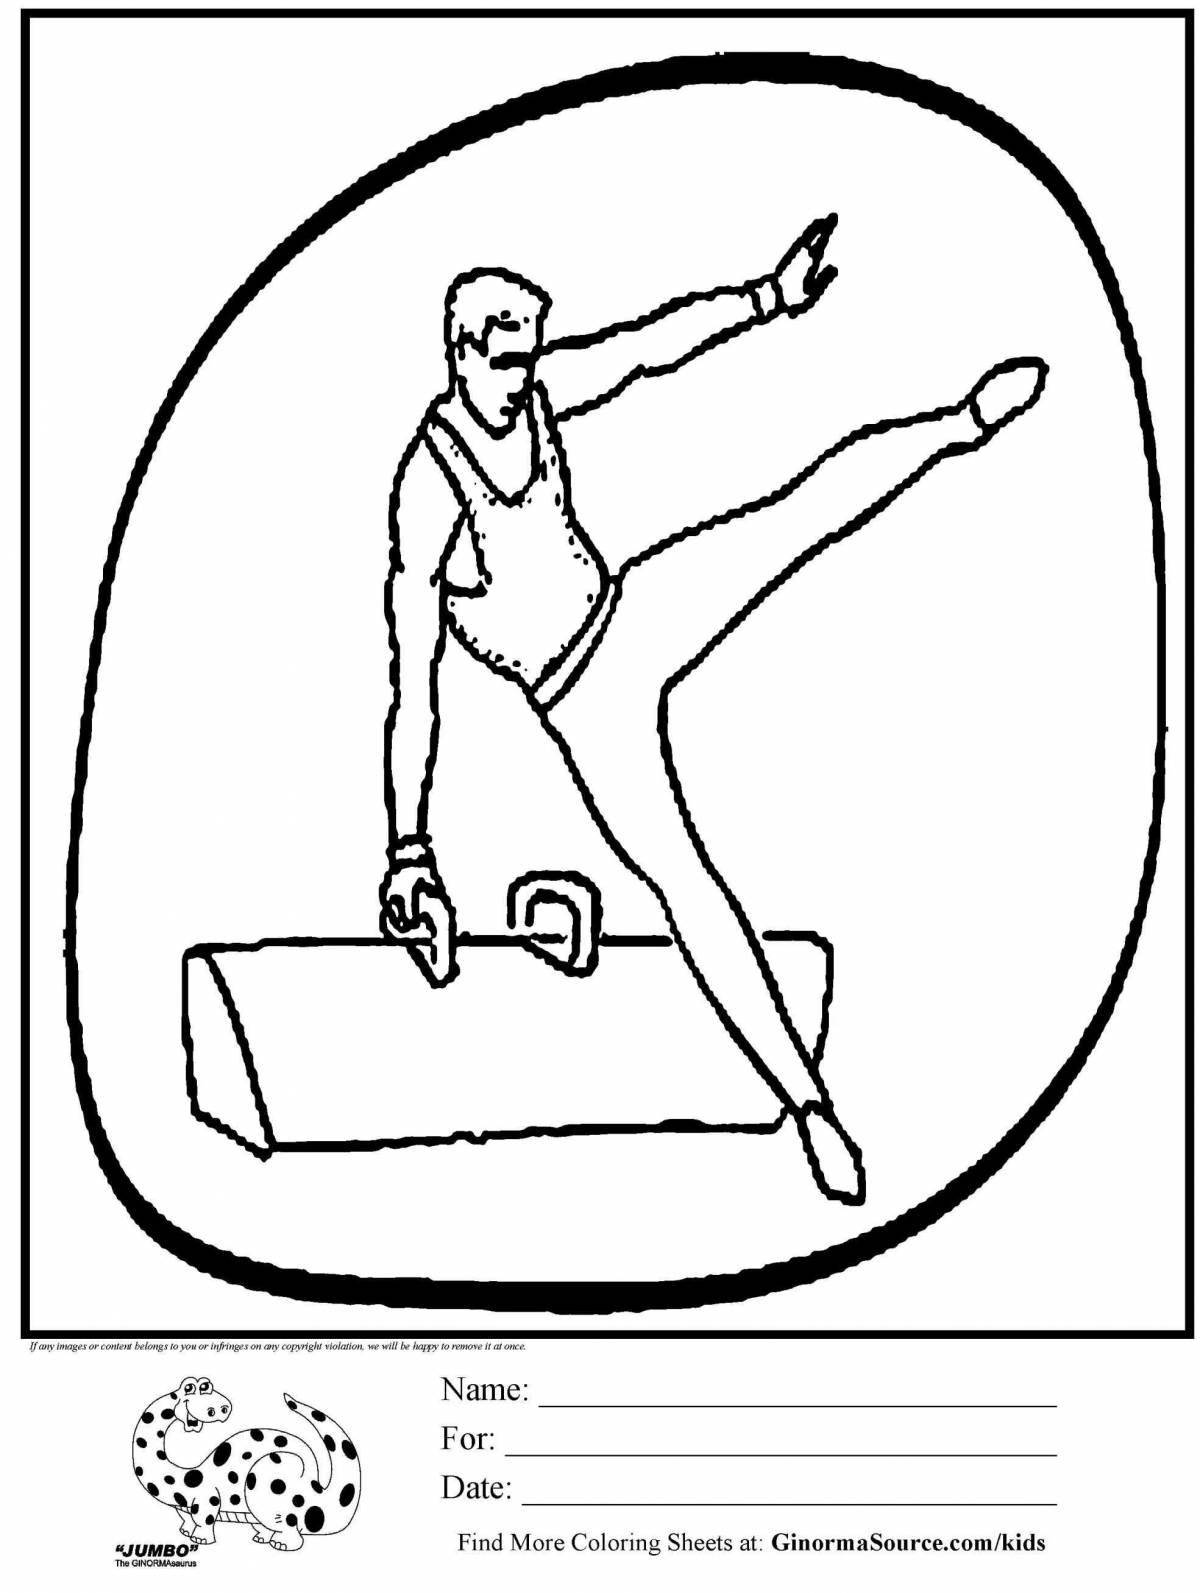 Animated acrobat coloring page